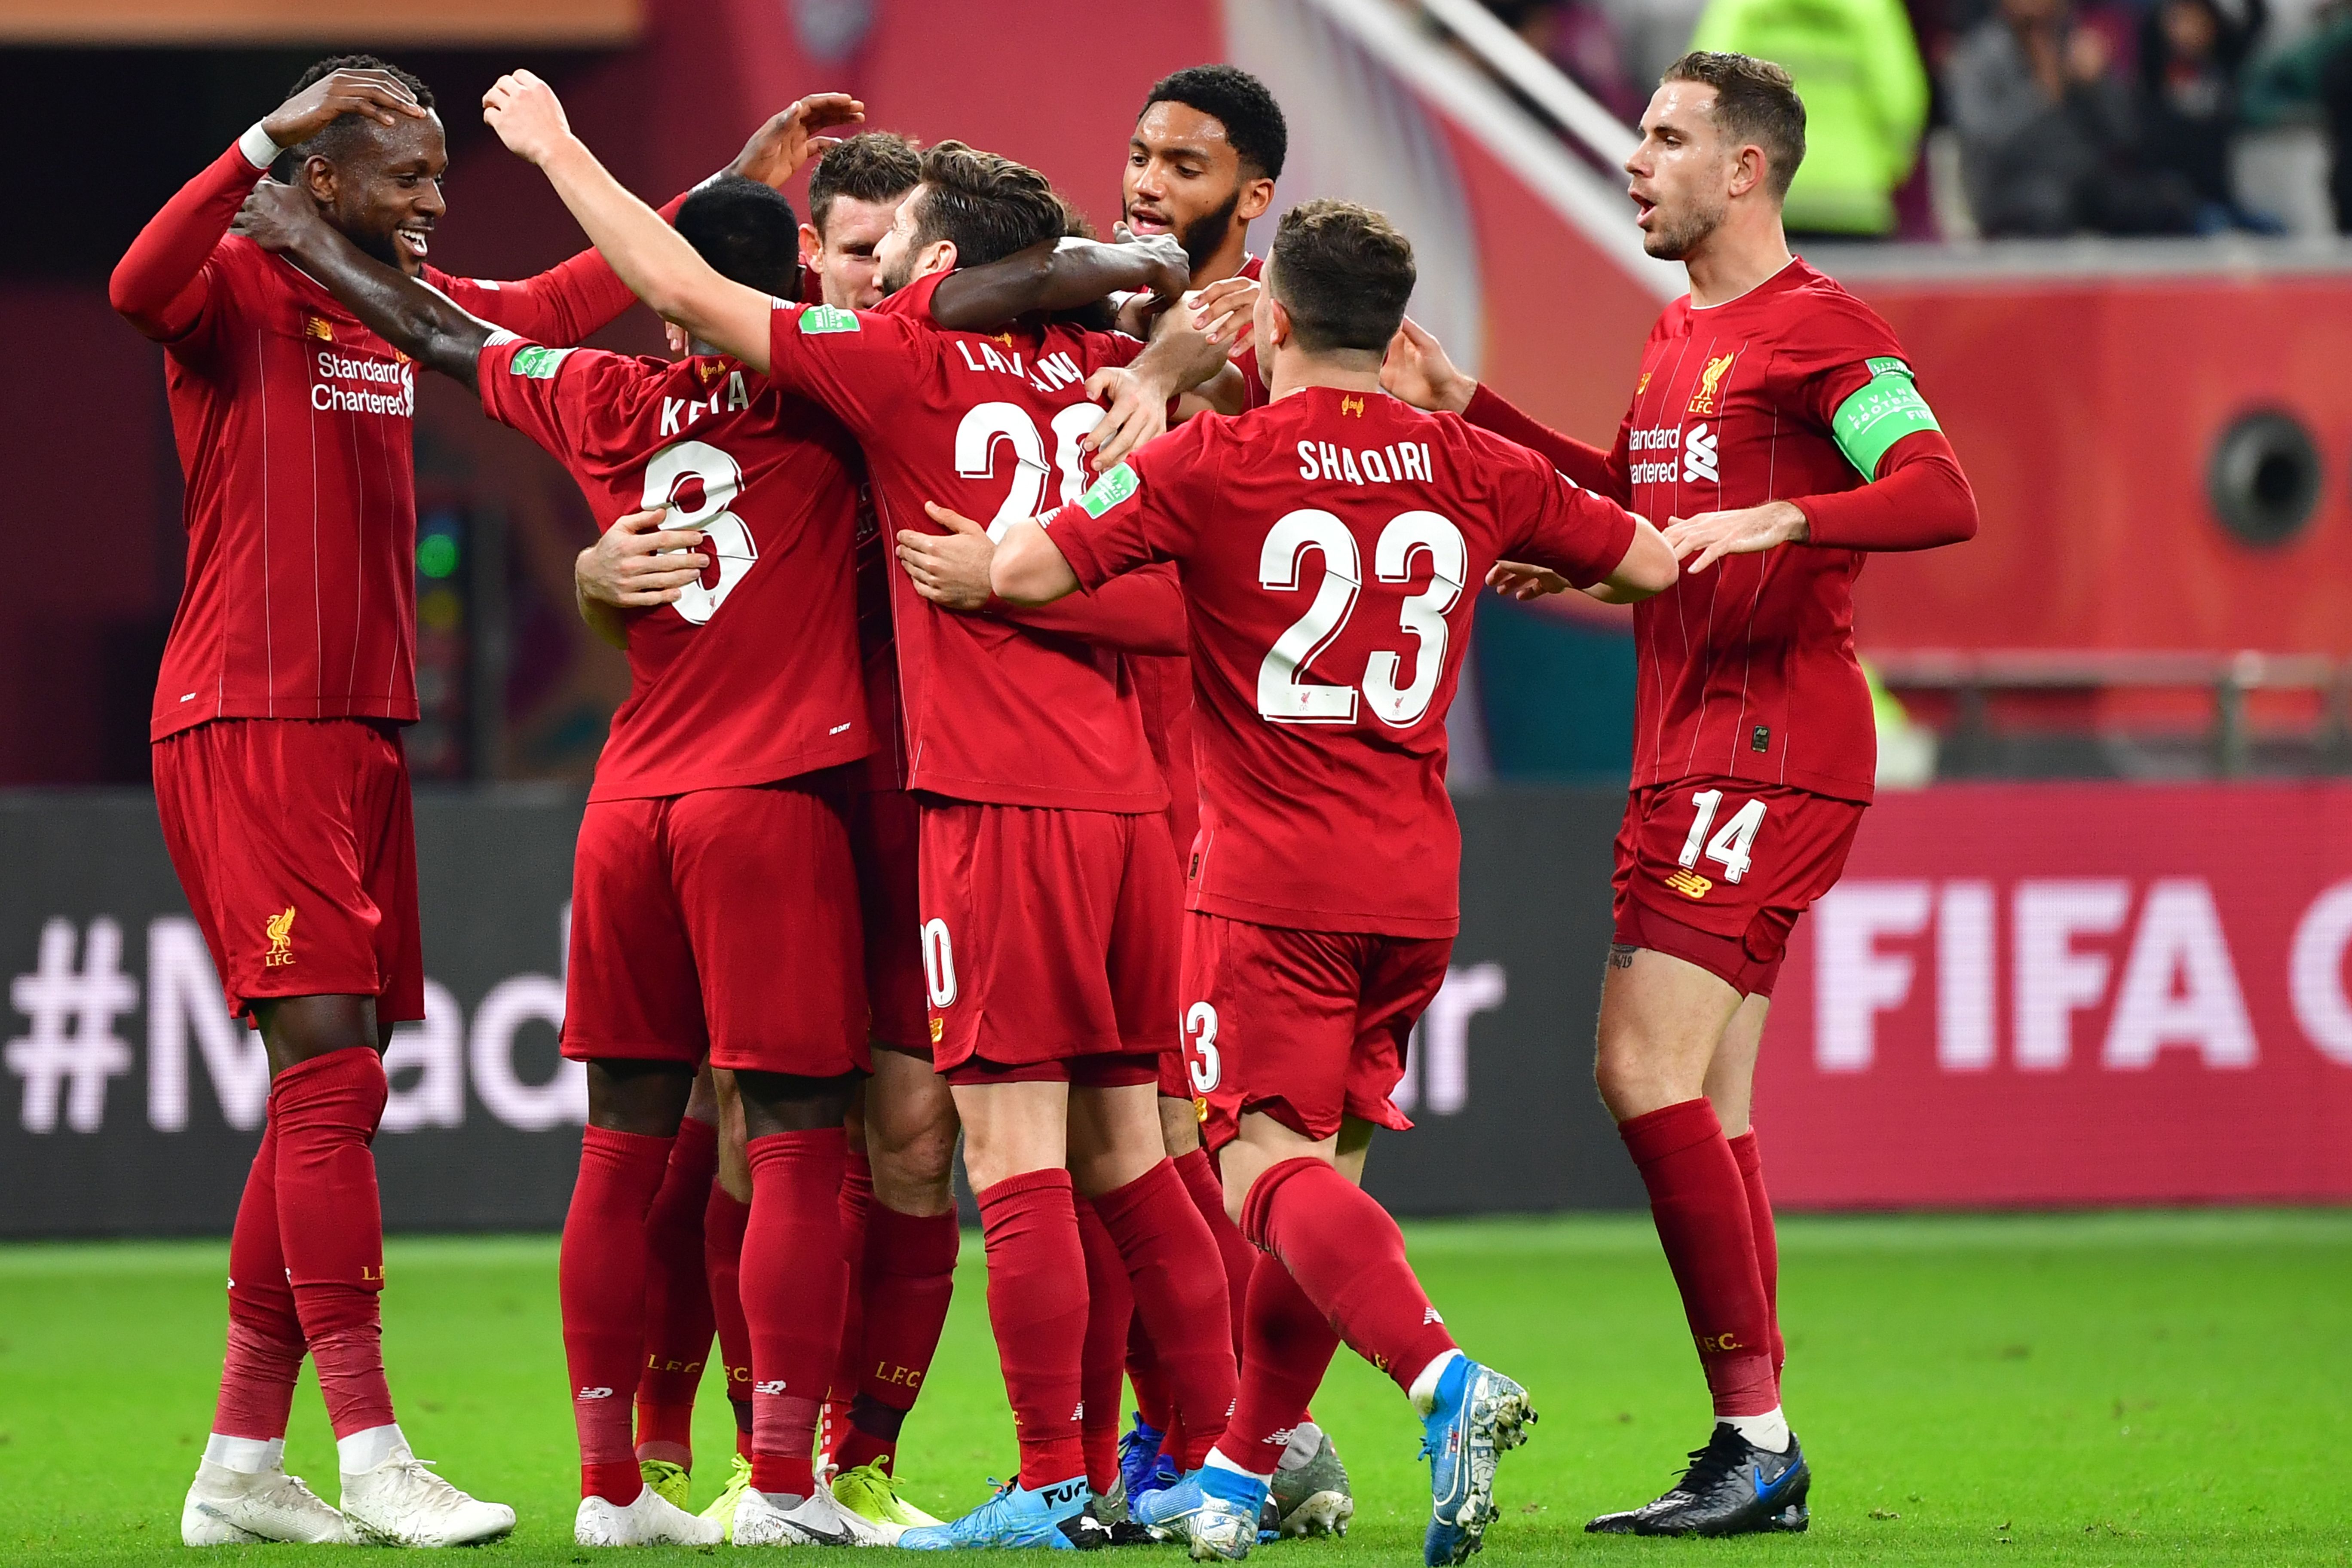 Liverpool's players celebrate their opening goal during the 2019 FIFA Club World Cup semi-final football match between Mexico's Monterrey and England's Liverpool at the Khalifa International Stadium in the Qatari capital Doha on December 18, 2019. (Photo by Giuseppe CACACE / AFP) (Photo by GIUSEPPE CACACE/AFP via Getty Images)